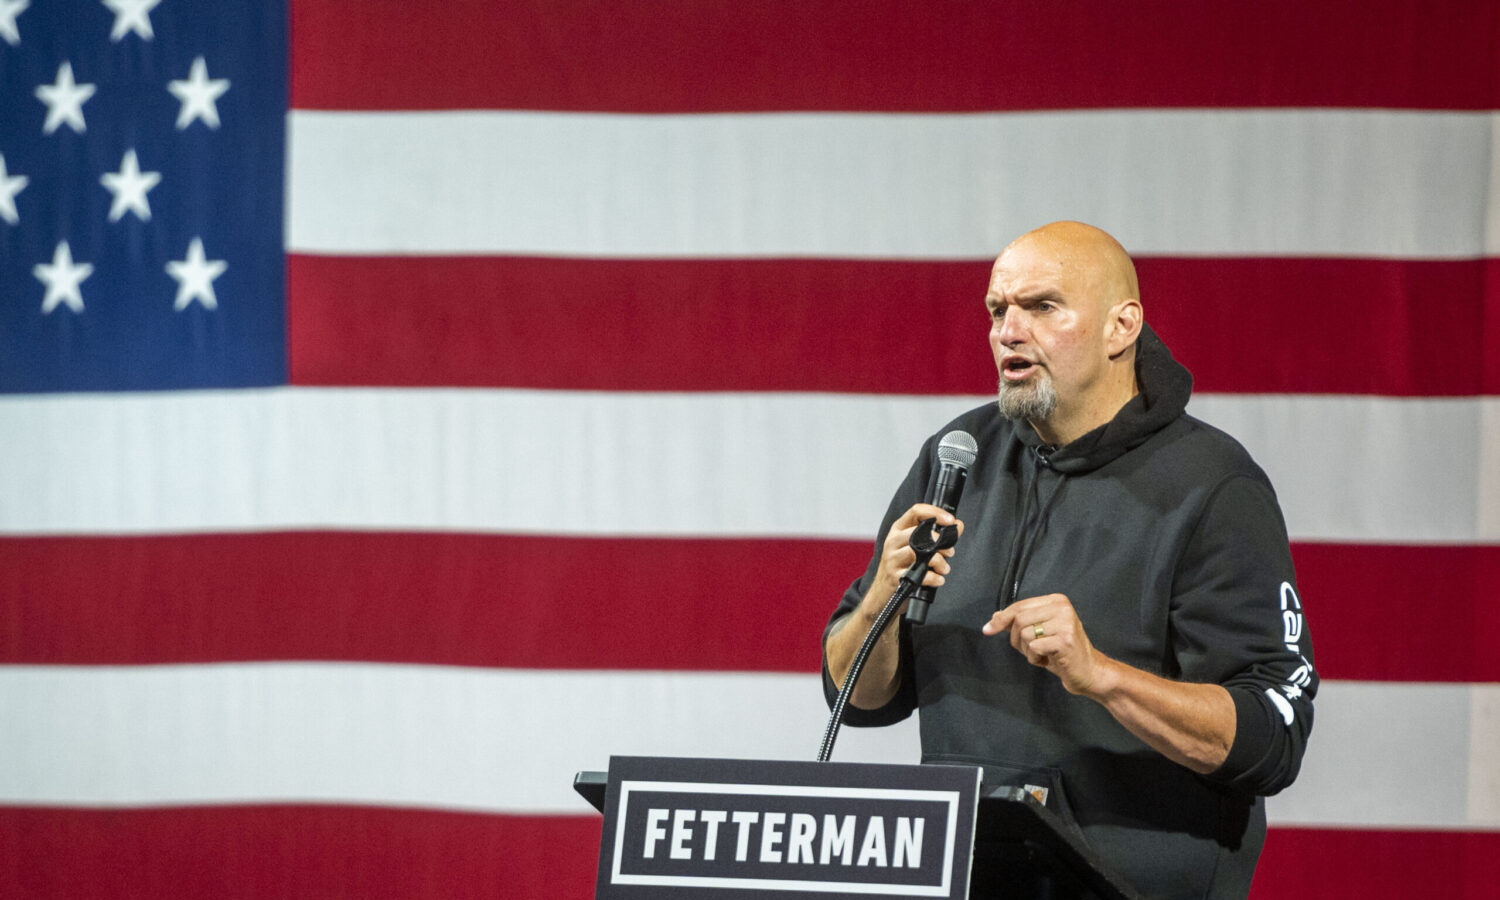 John Fetterman urges Biden to legalize weed ahead of Labor Day